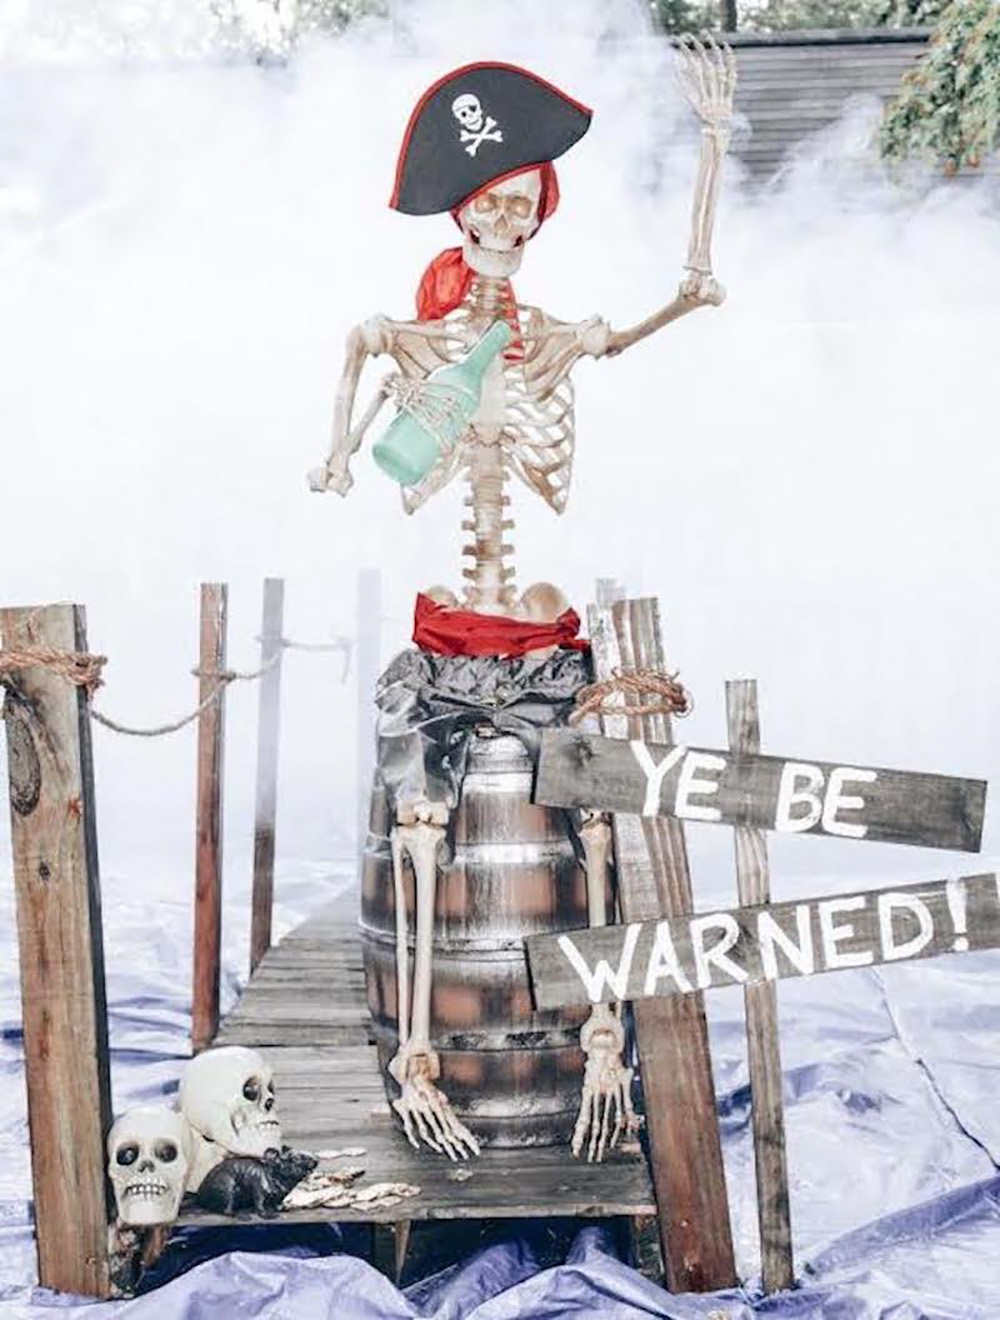 A skeleton in a pirate hat sitting on a barrel.